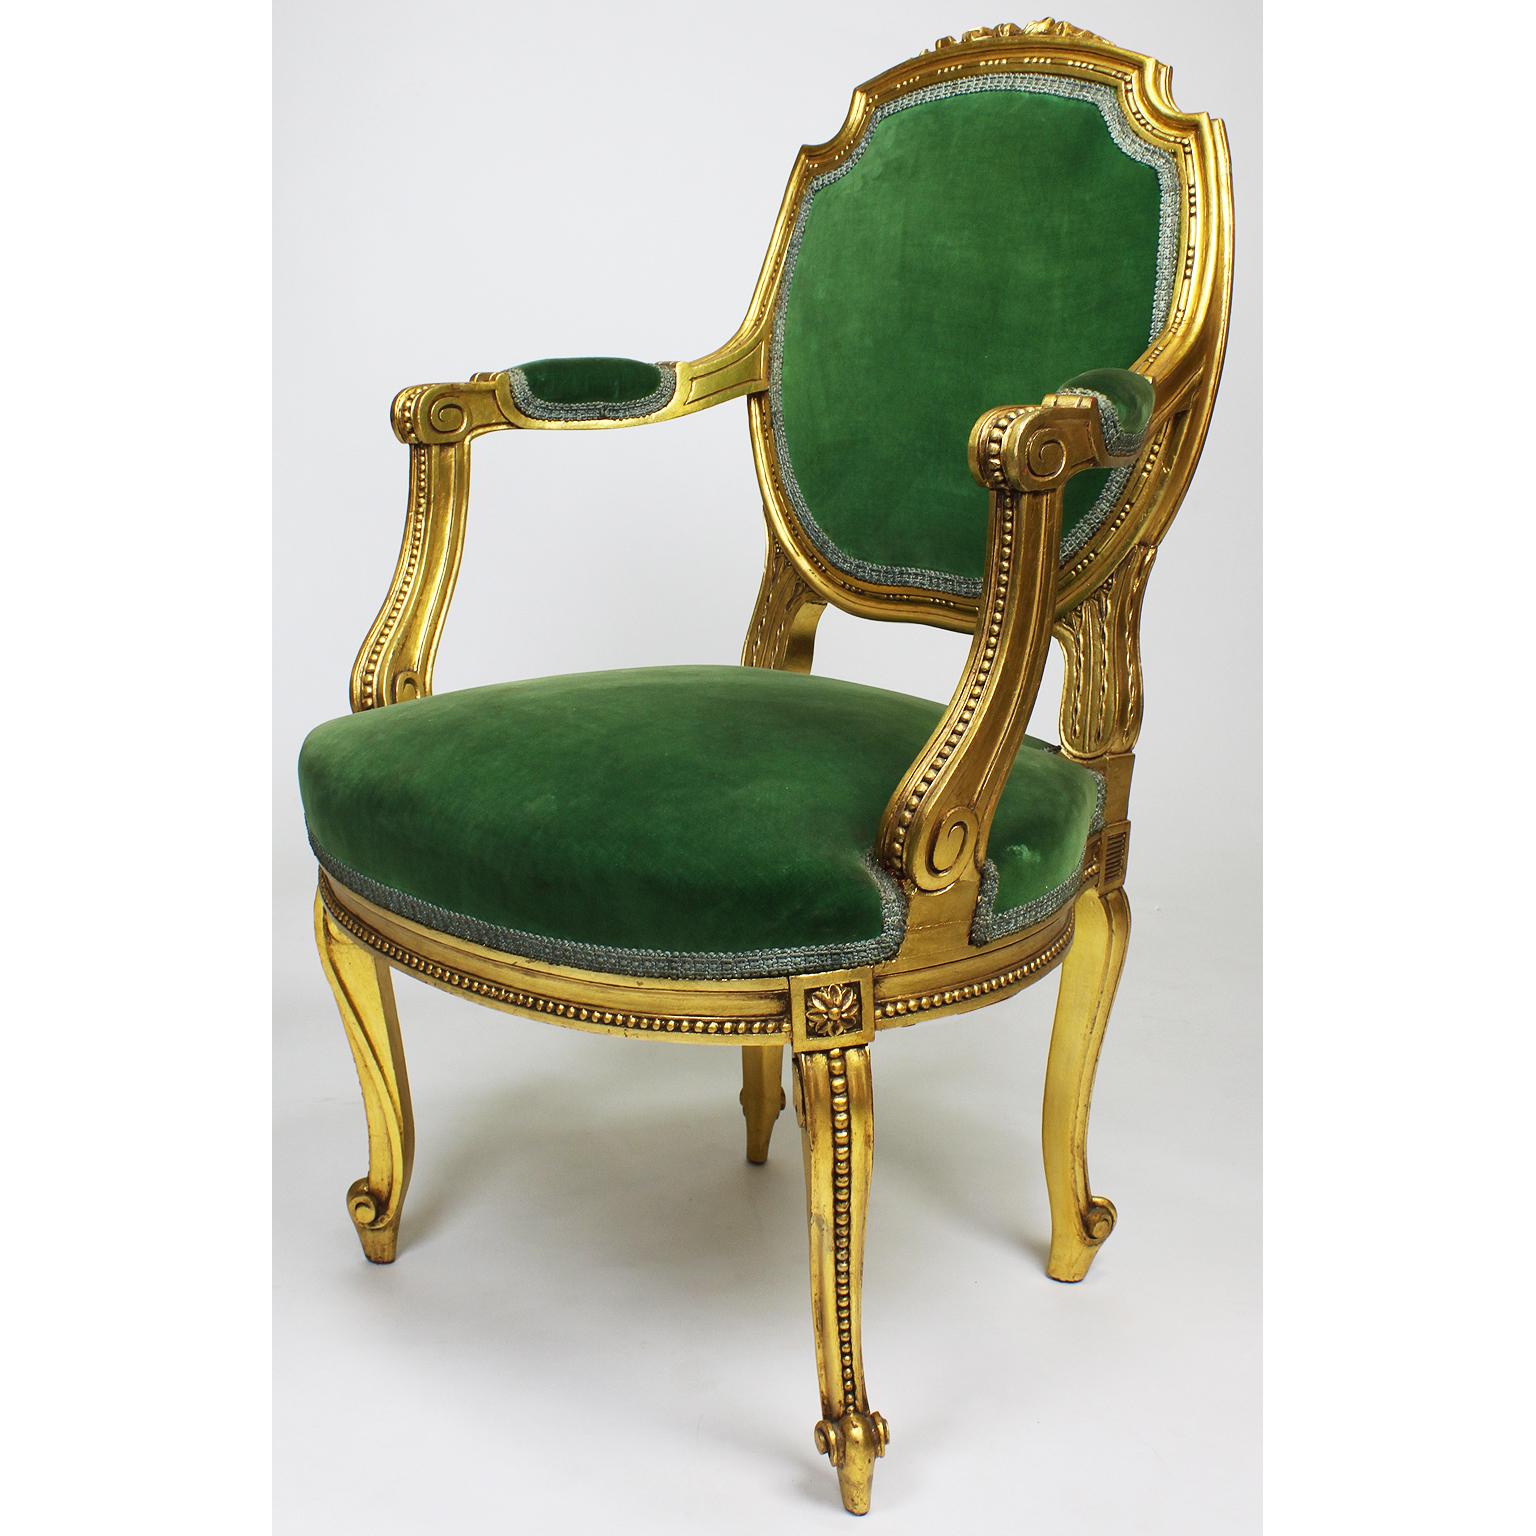 A pair of French Belle Époque Louis XV Style Fauteuil à la Reine (Armchairs) Frames. The upholstered backrest with a giltwood carved ribbon, open and padded armrests and cabriolet legs, Paris, circa 1900-1920.

Measures: Height 37 1/4 inches (94.6